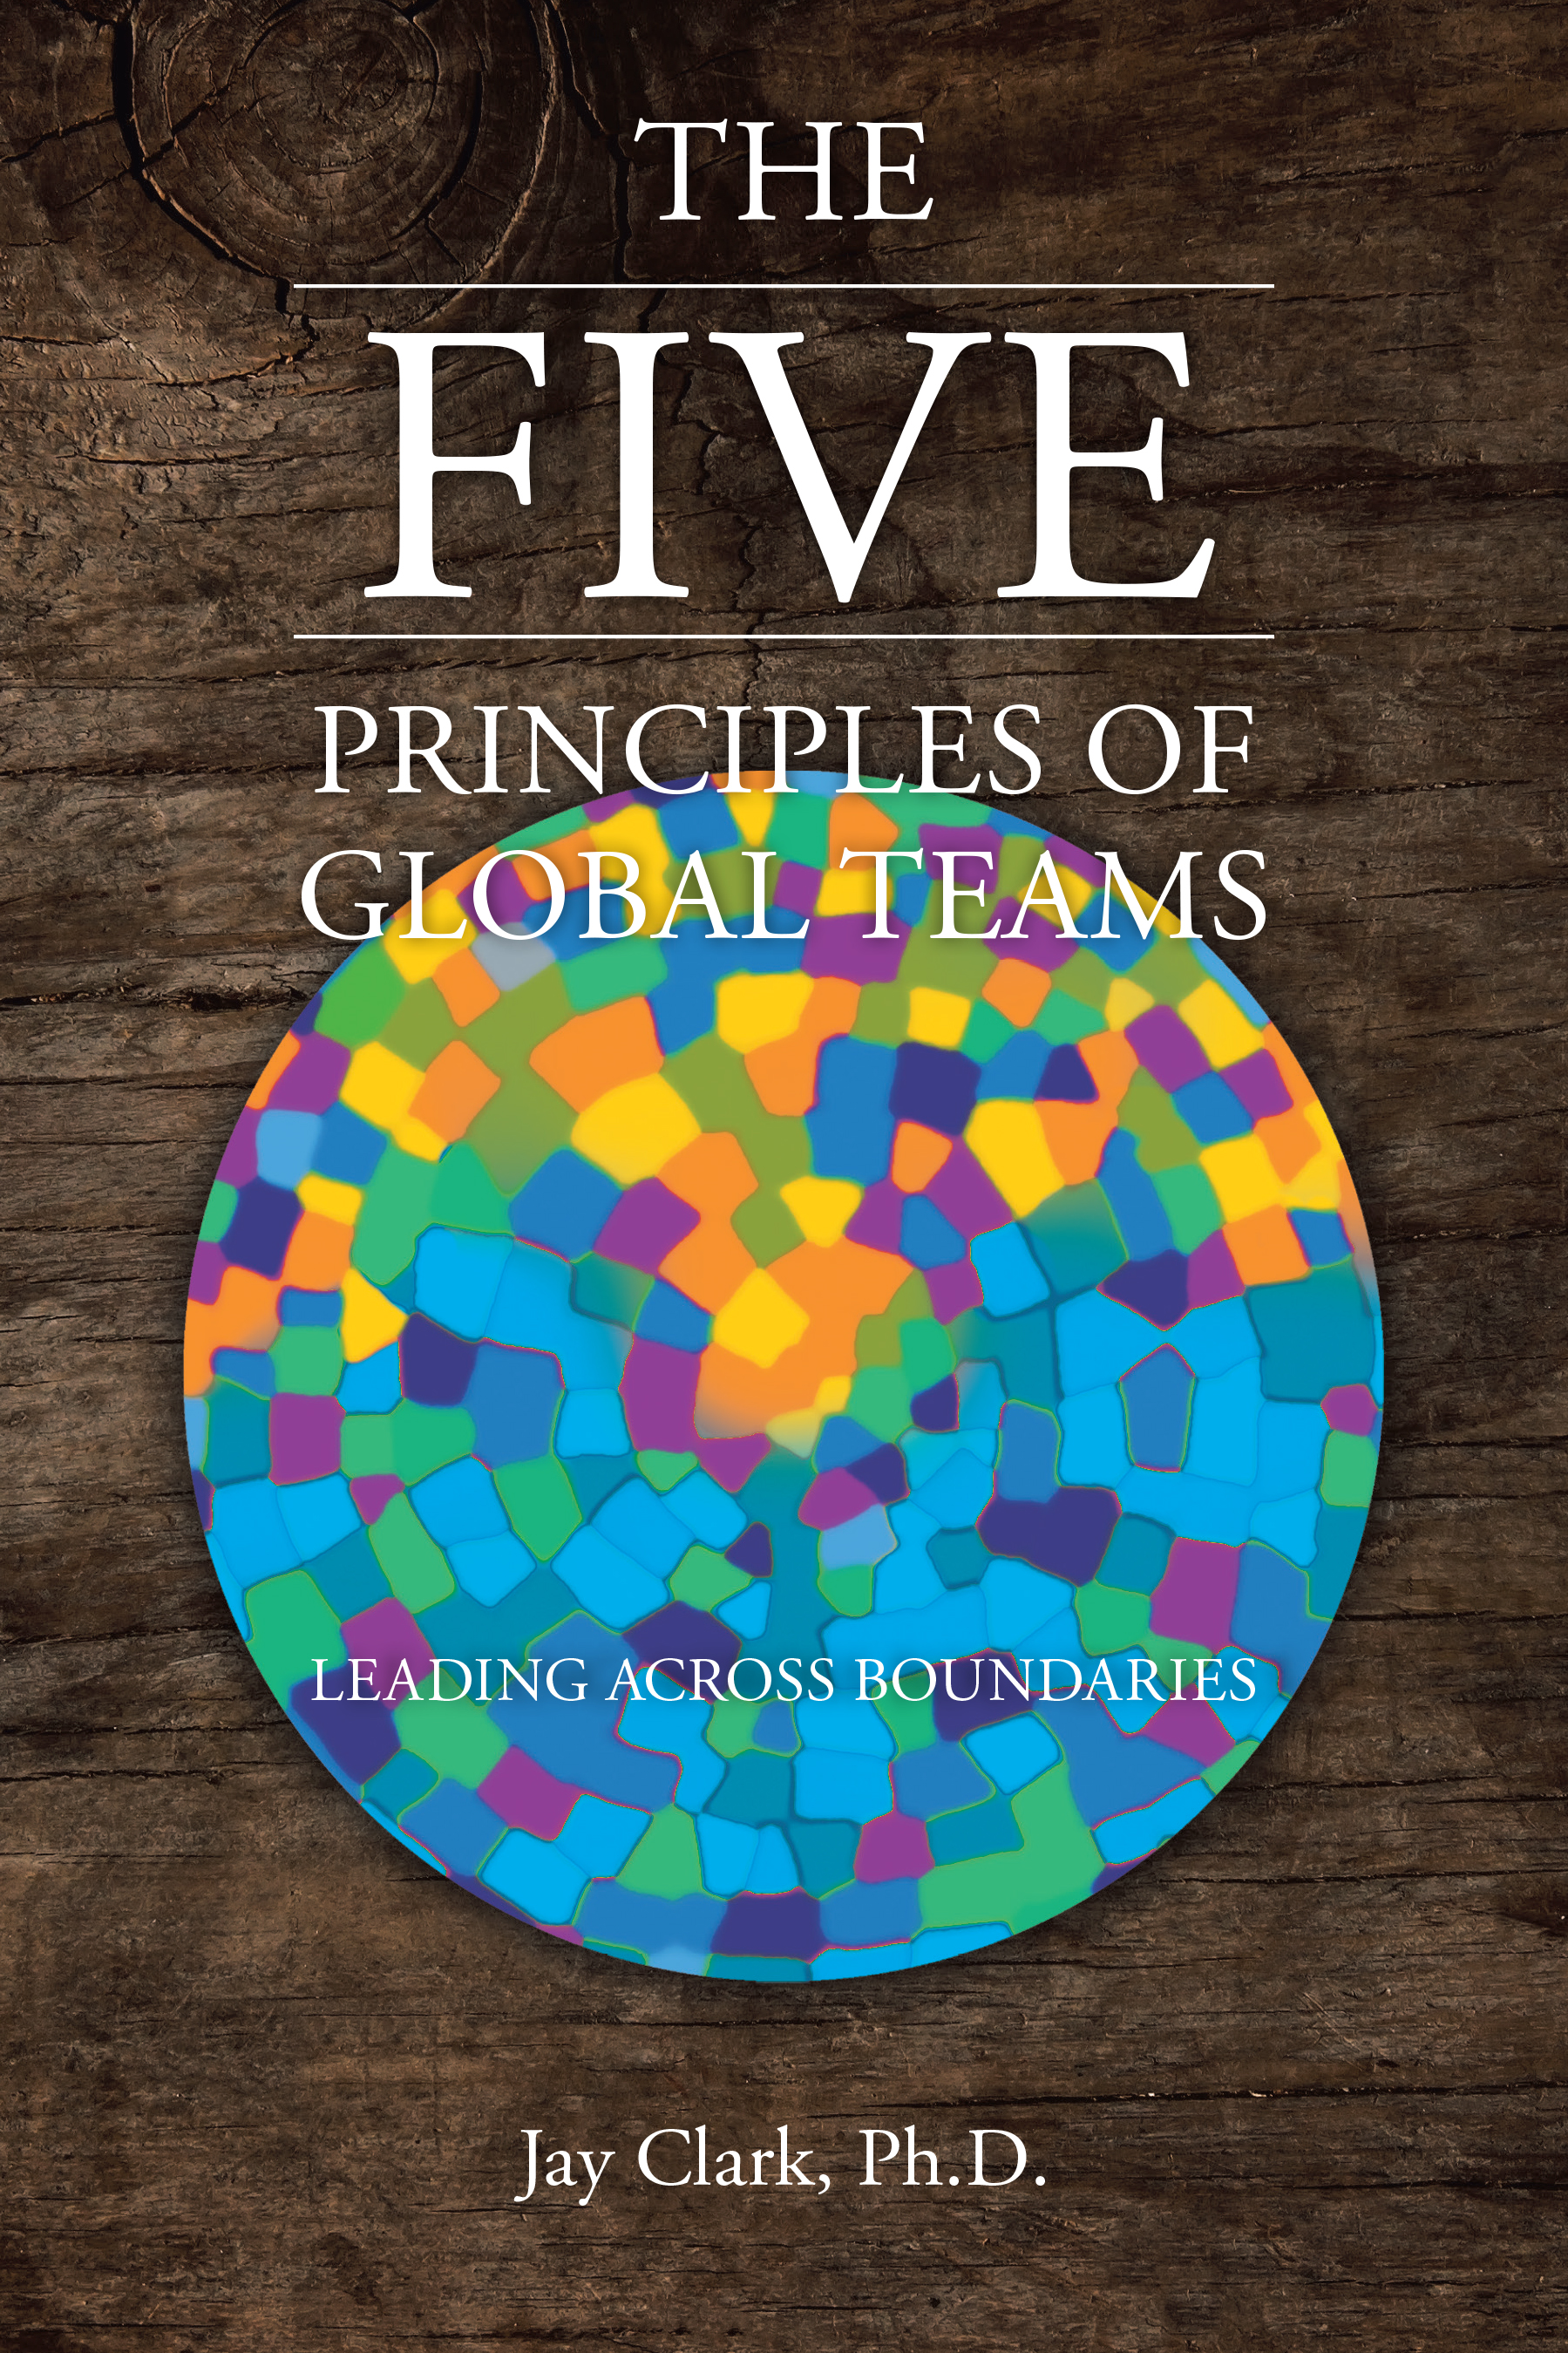 Author Jay Clark, Ph.D.’s New Book, “The Five Principles of Global Teams: Leading Across Boundaries,” Reveals the Keys to Successful Leadership Across Global Borders